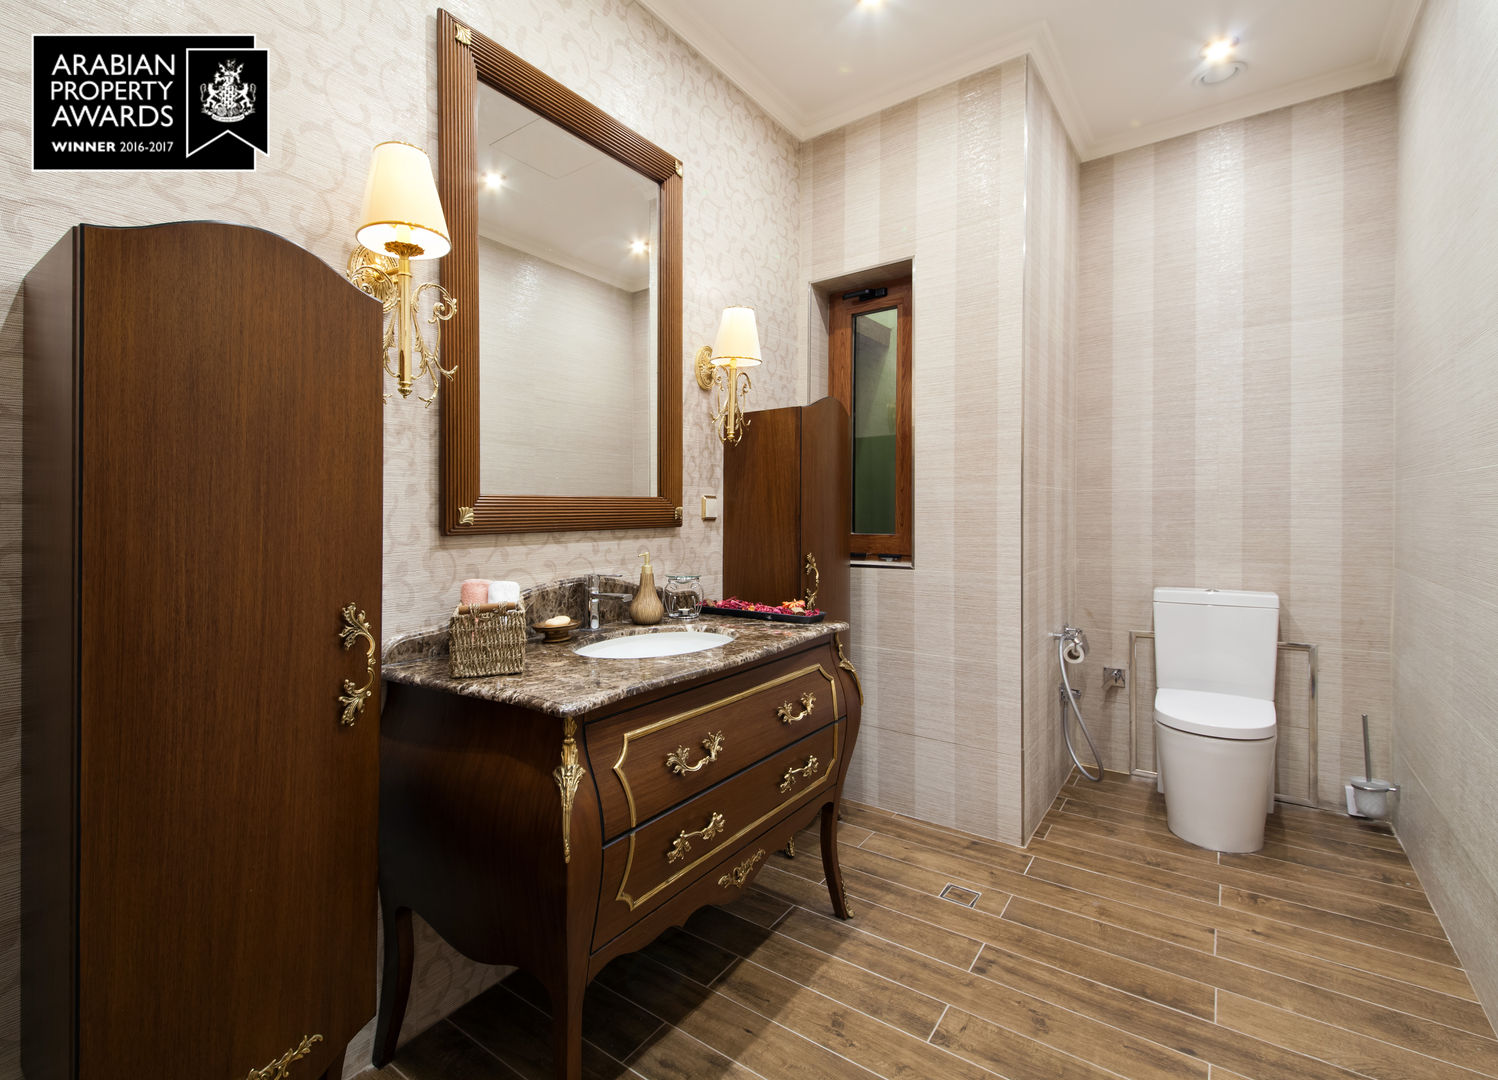 FF-Bathroom / Private Villa Sia Moore Archıtecture Interıor Desıgn Classic style bathrooms Wood Wood effect sia moore,turnkey project,fit out contractor,architectural,luxury design,interior design,designer,design,classical design,best design,perfect,amazing